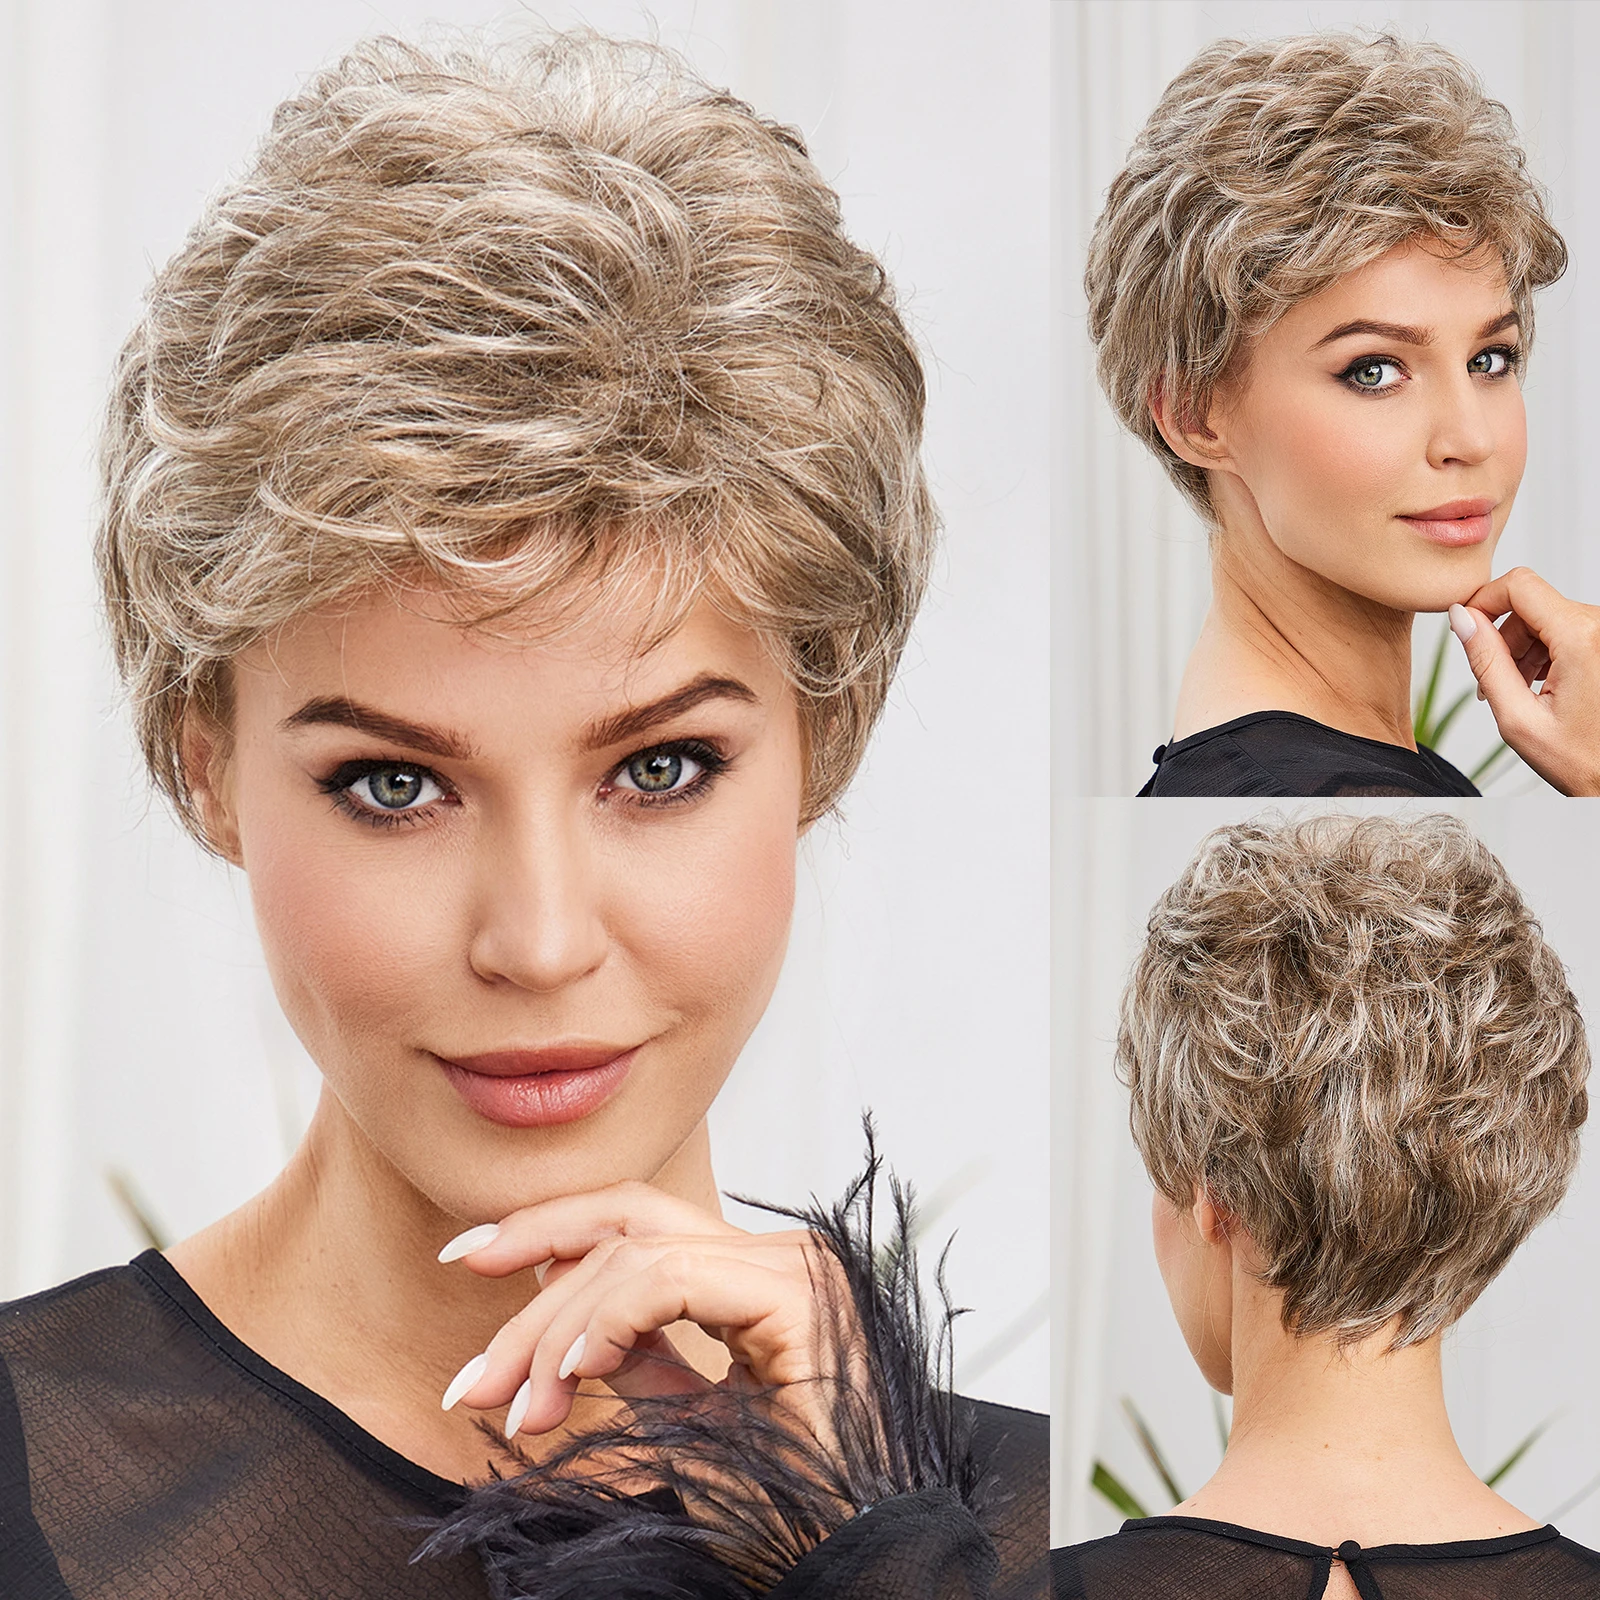 bob-brown-blonde-synthetic-wigs-for-women-short-layered-wigs-with-bangs-natural-daily-blend-hair-wig-kanekalon-synthetic-wig-use